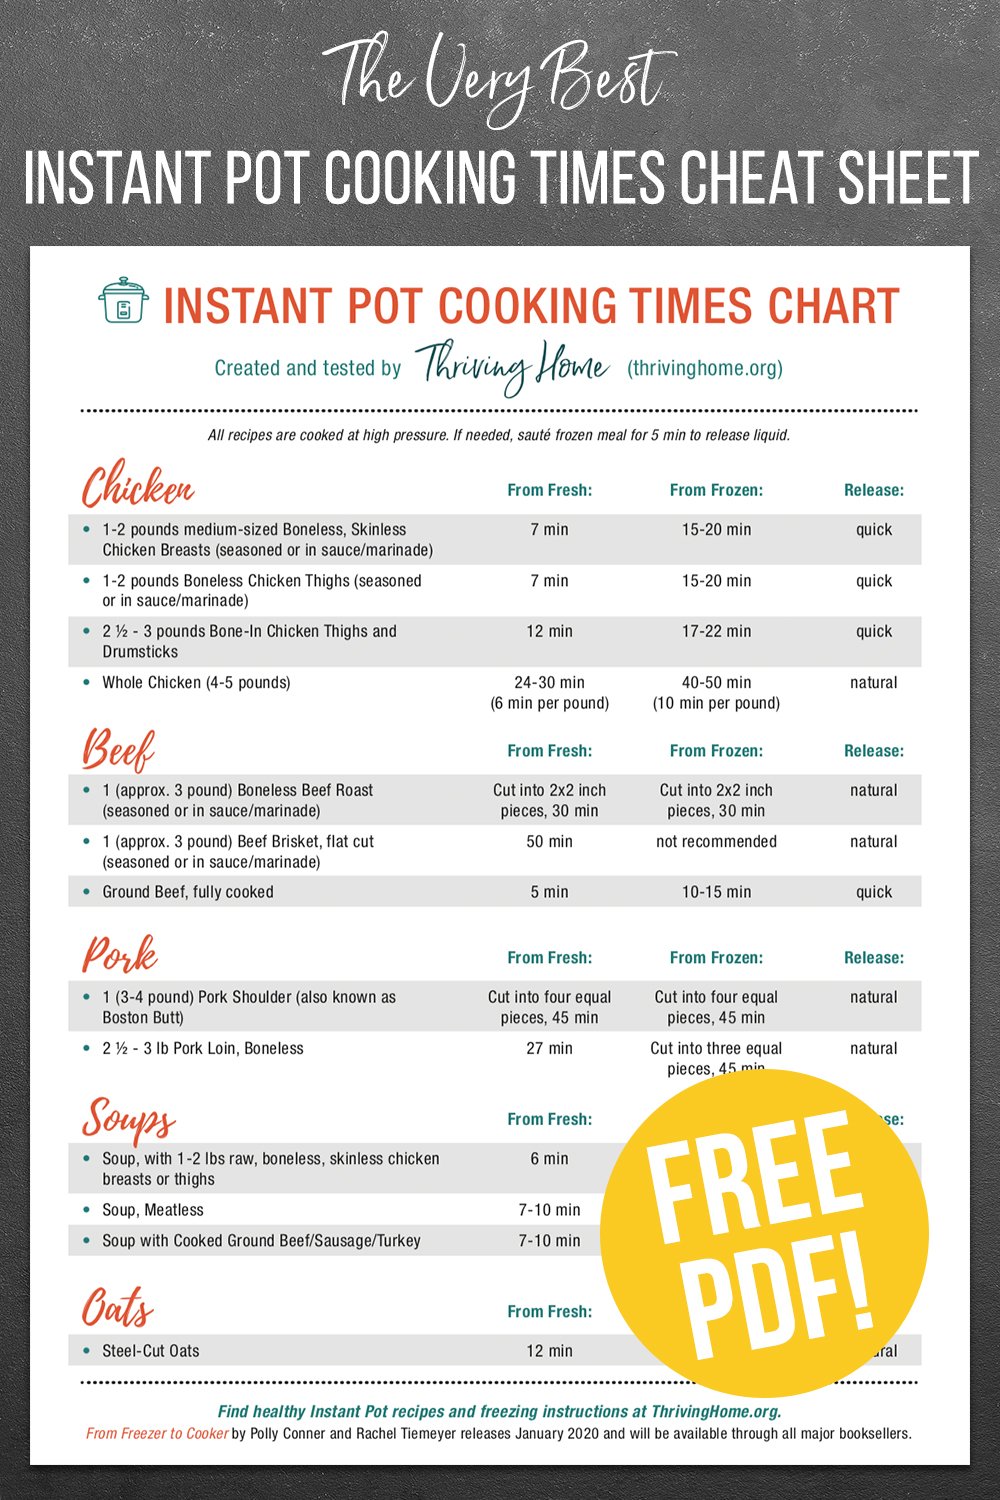 Instant Pot Cooking Times Chart.